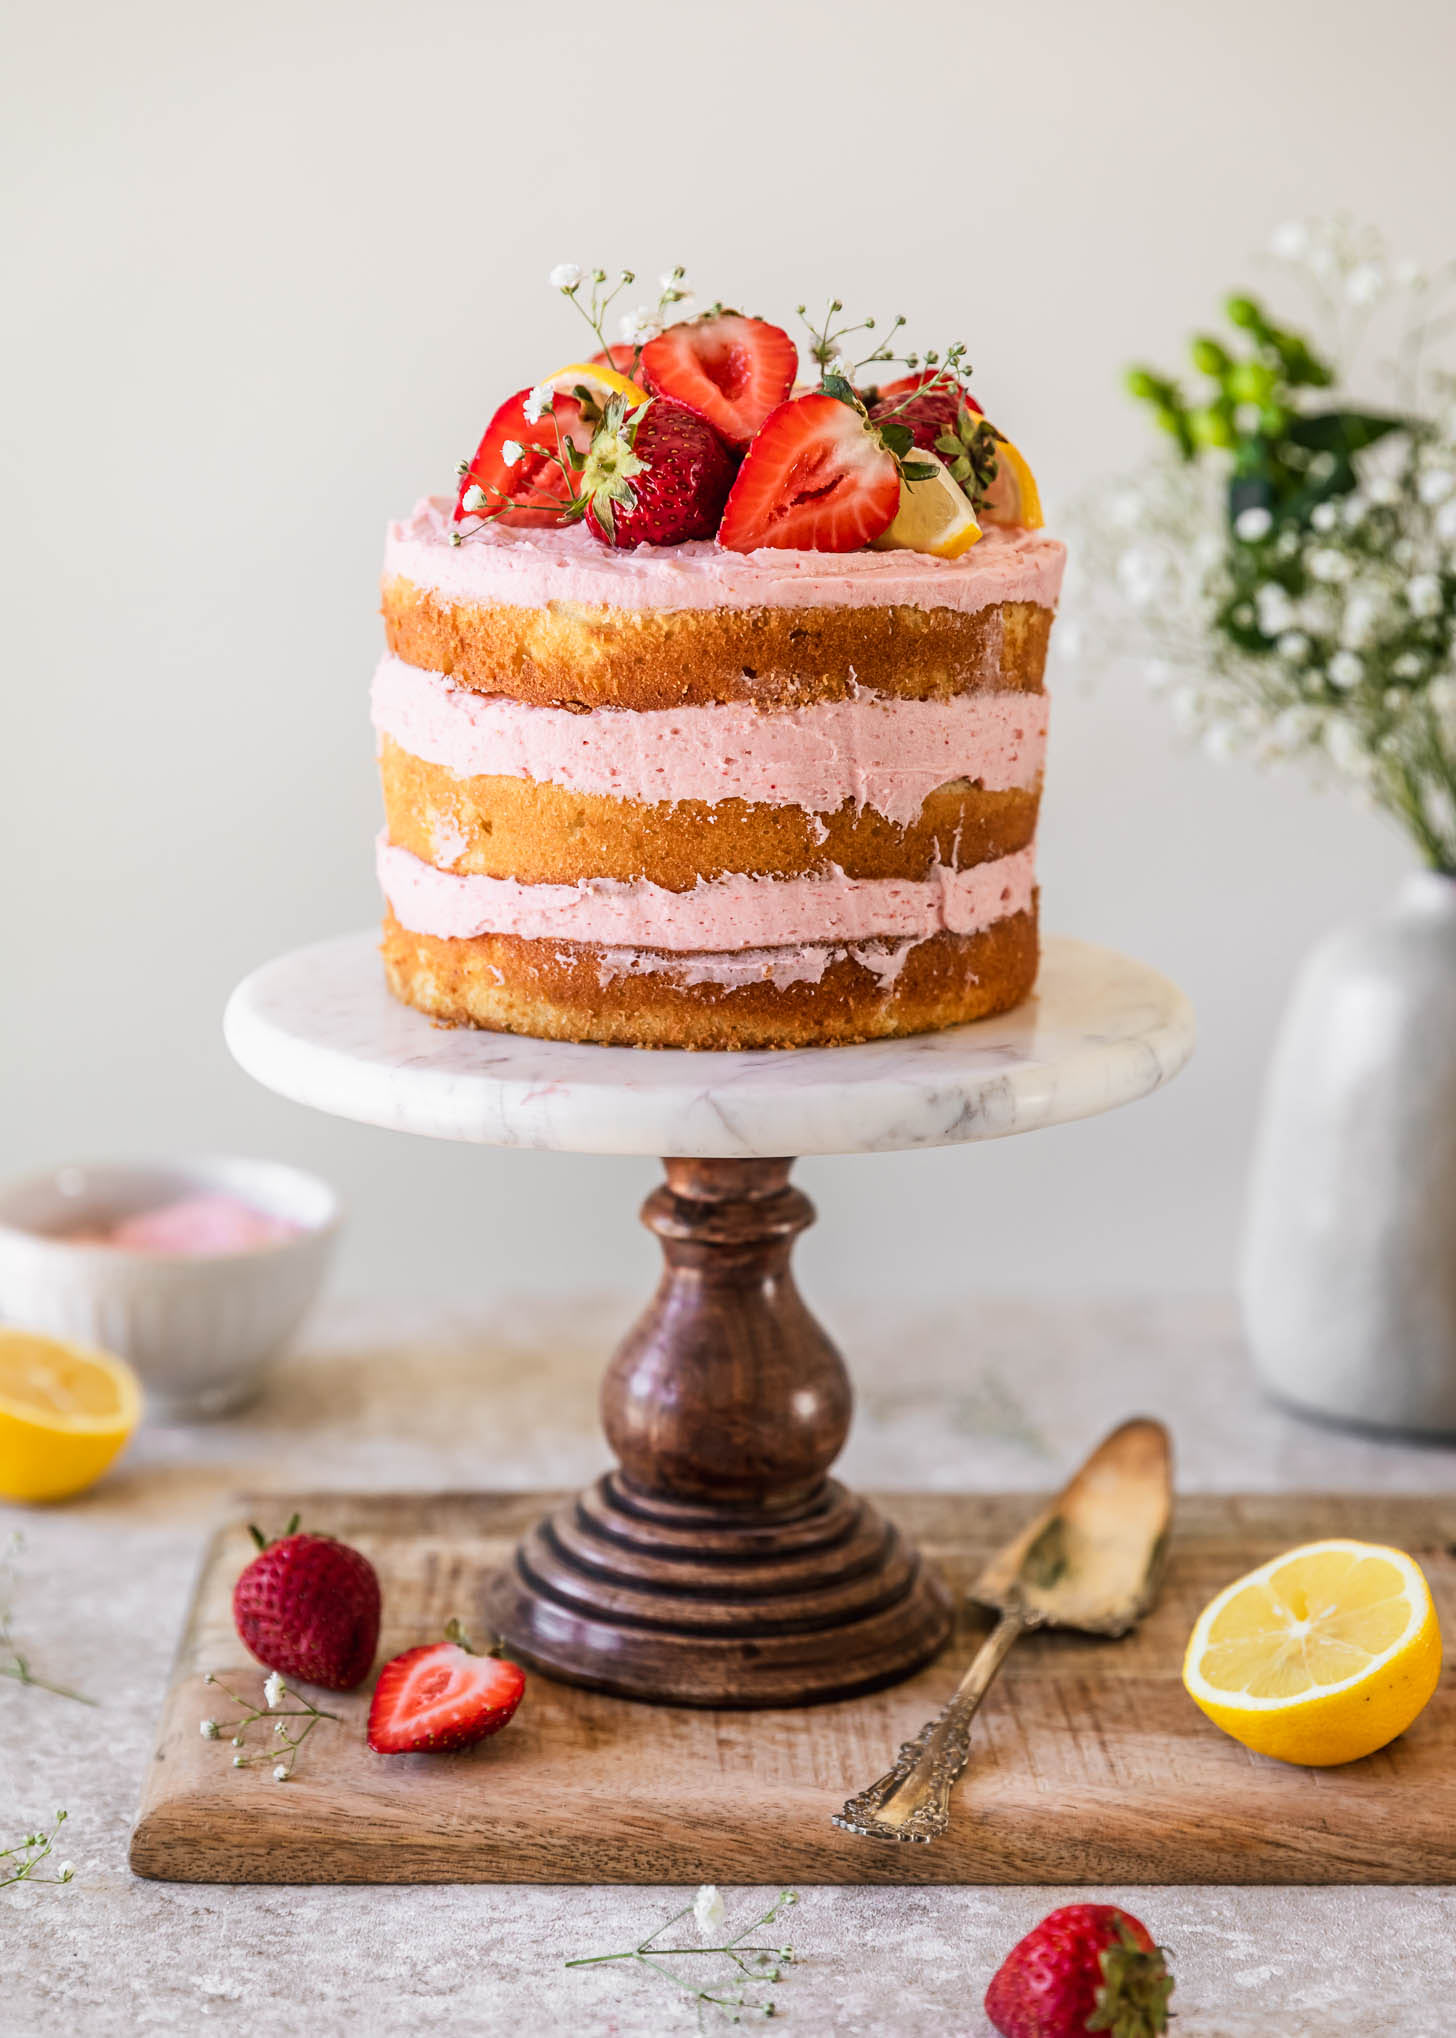 A ricotta strawberry lemon cake on a marble cake stand placed on a wood board next to sliced strawberries, a cake server, and a bouquet of white flowers on a tan counter.